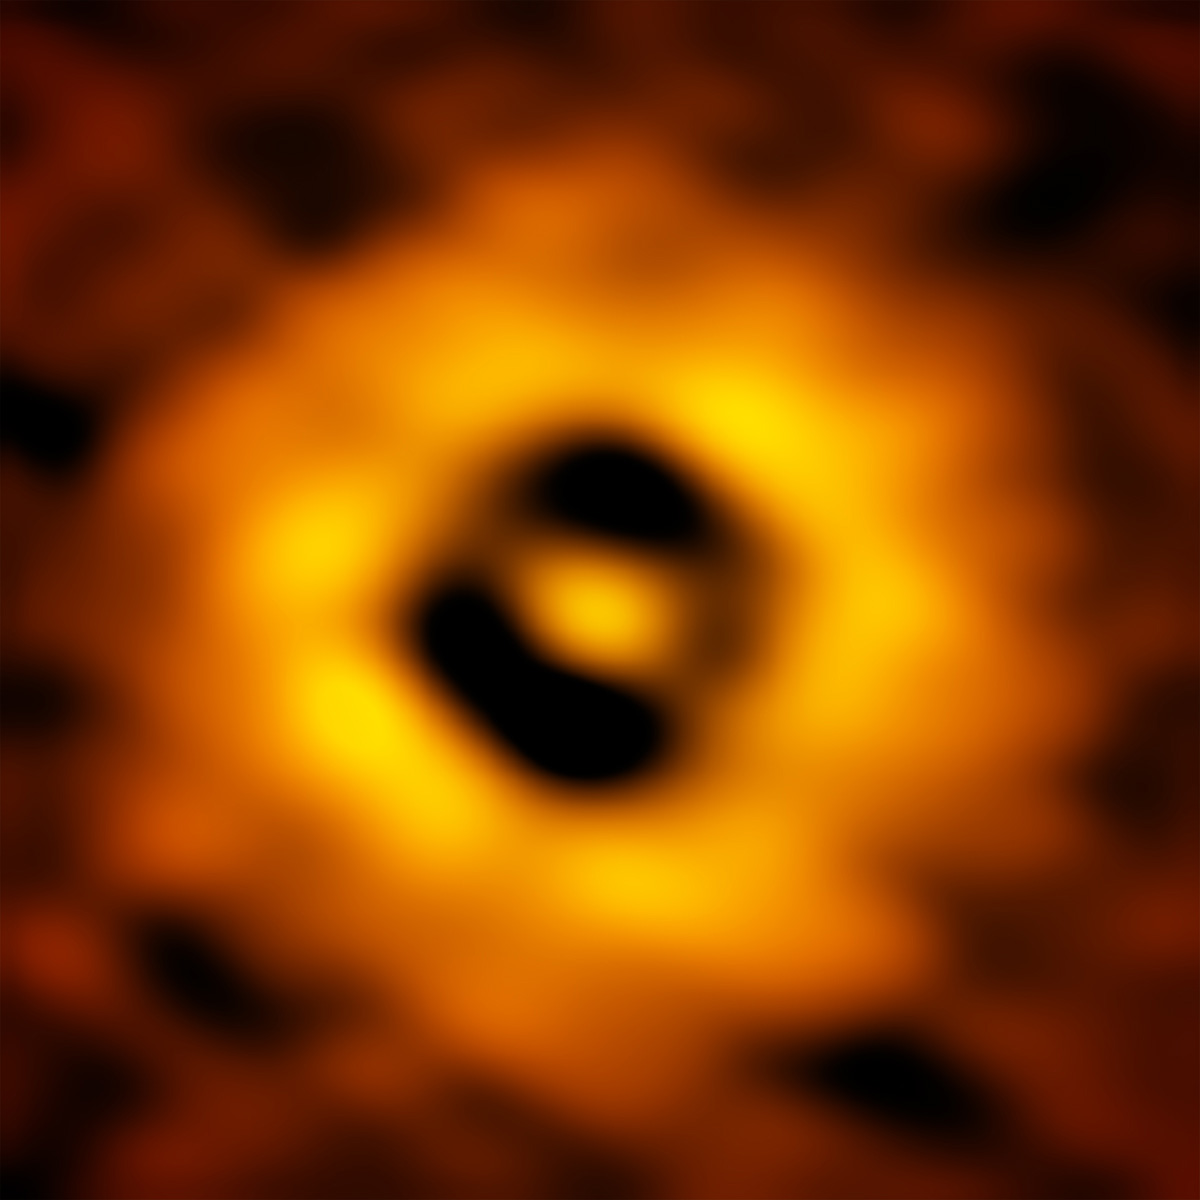 The inner region of the TW Hydrae protoplanetary disk as imaged by ALMA. The image has a resolution of 1 AU (Astronomical Unit, the distance from the Earth to the Sun in our own Solar System). This new ALMA image reveals a gap in the disk at 1 AU, suggesting that a planet with the same orbit as Earth is forming there.